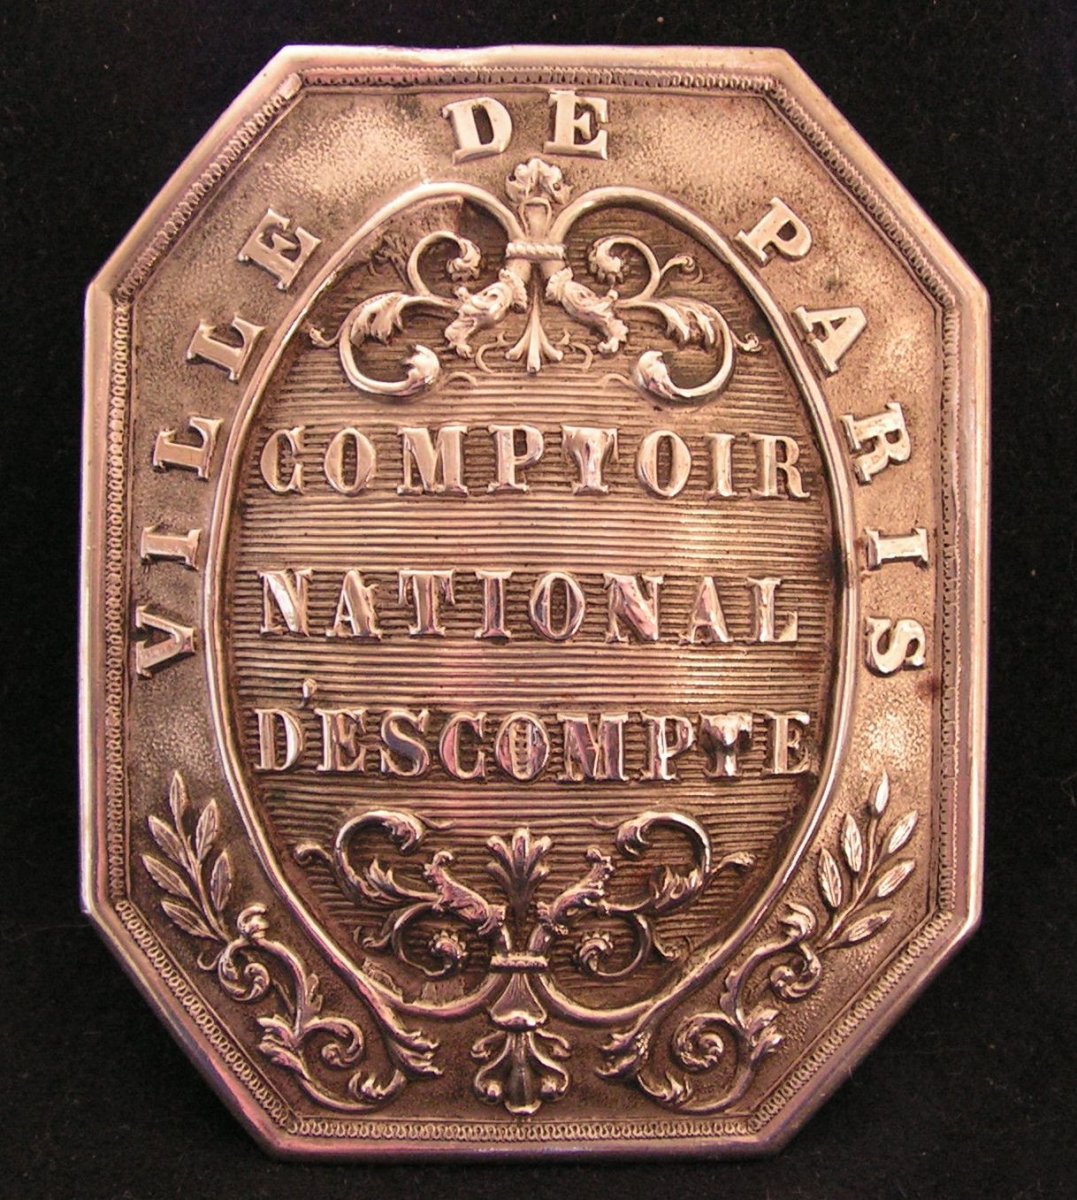 Trade Plate: National Discount Counter City Of Paris